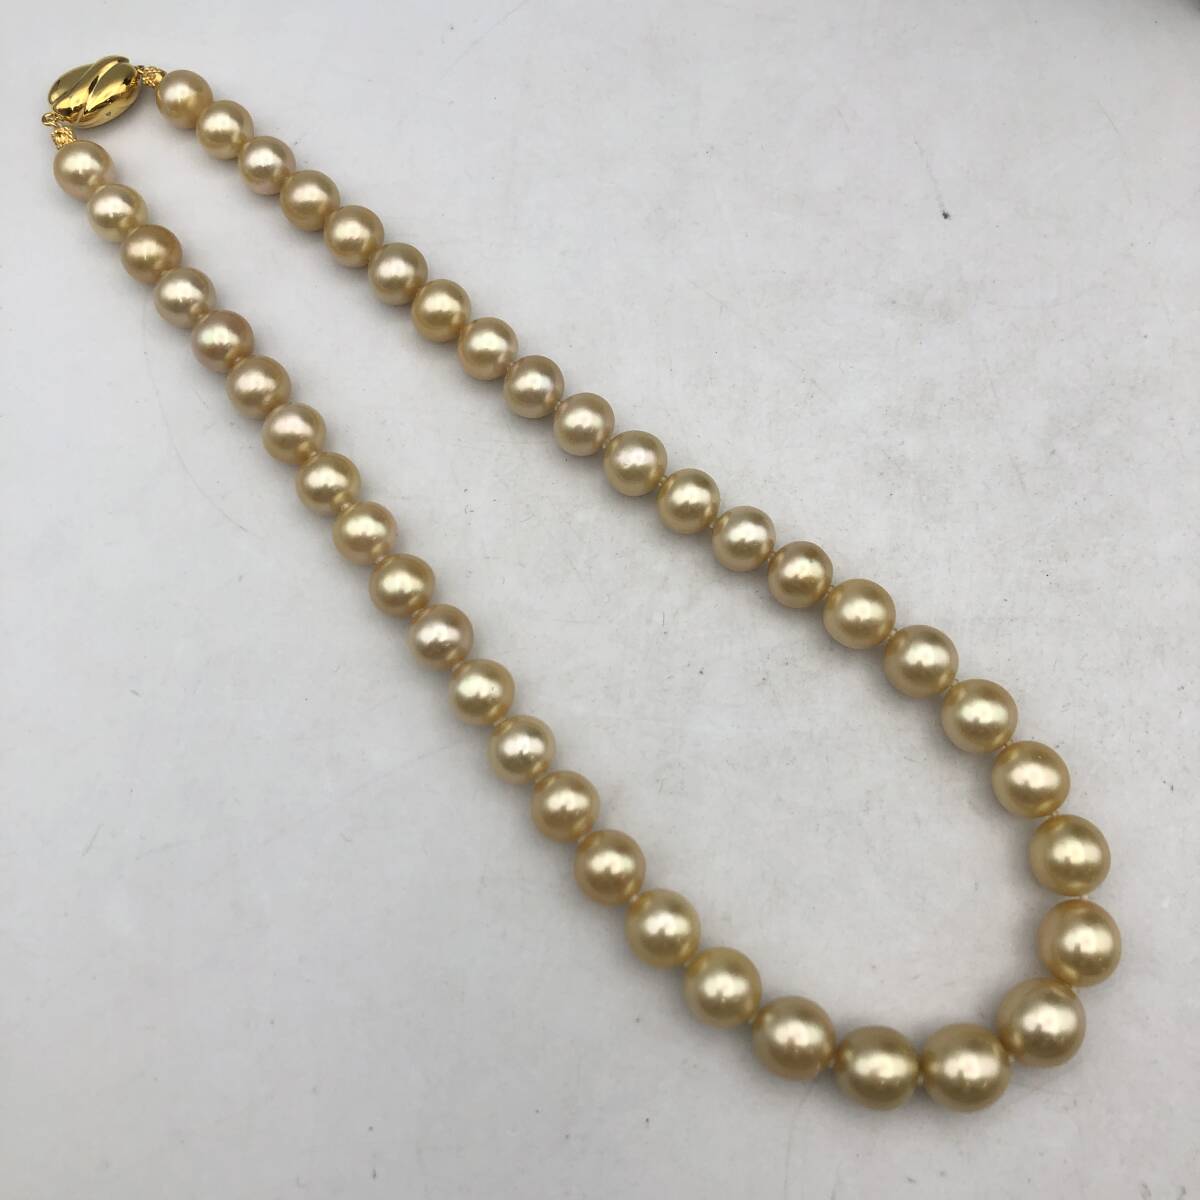 *E04749/book@ pearl / necklace / metal fittings SILVER/ pearl diameter approximately 9~11./ gross weight approximately 61.5g/ yellow group 